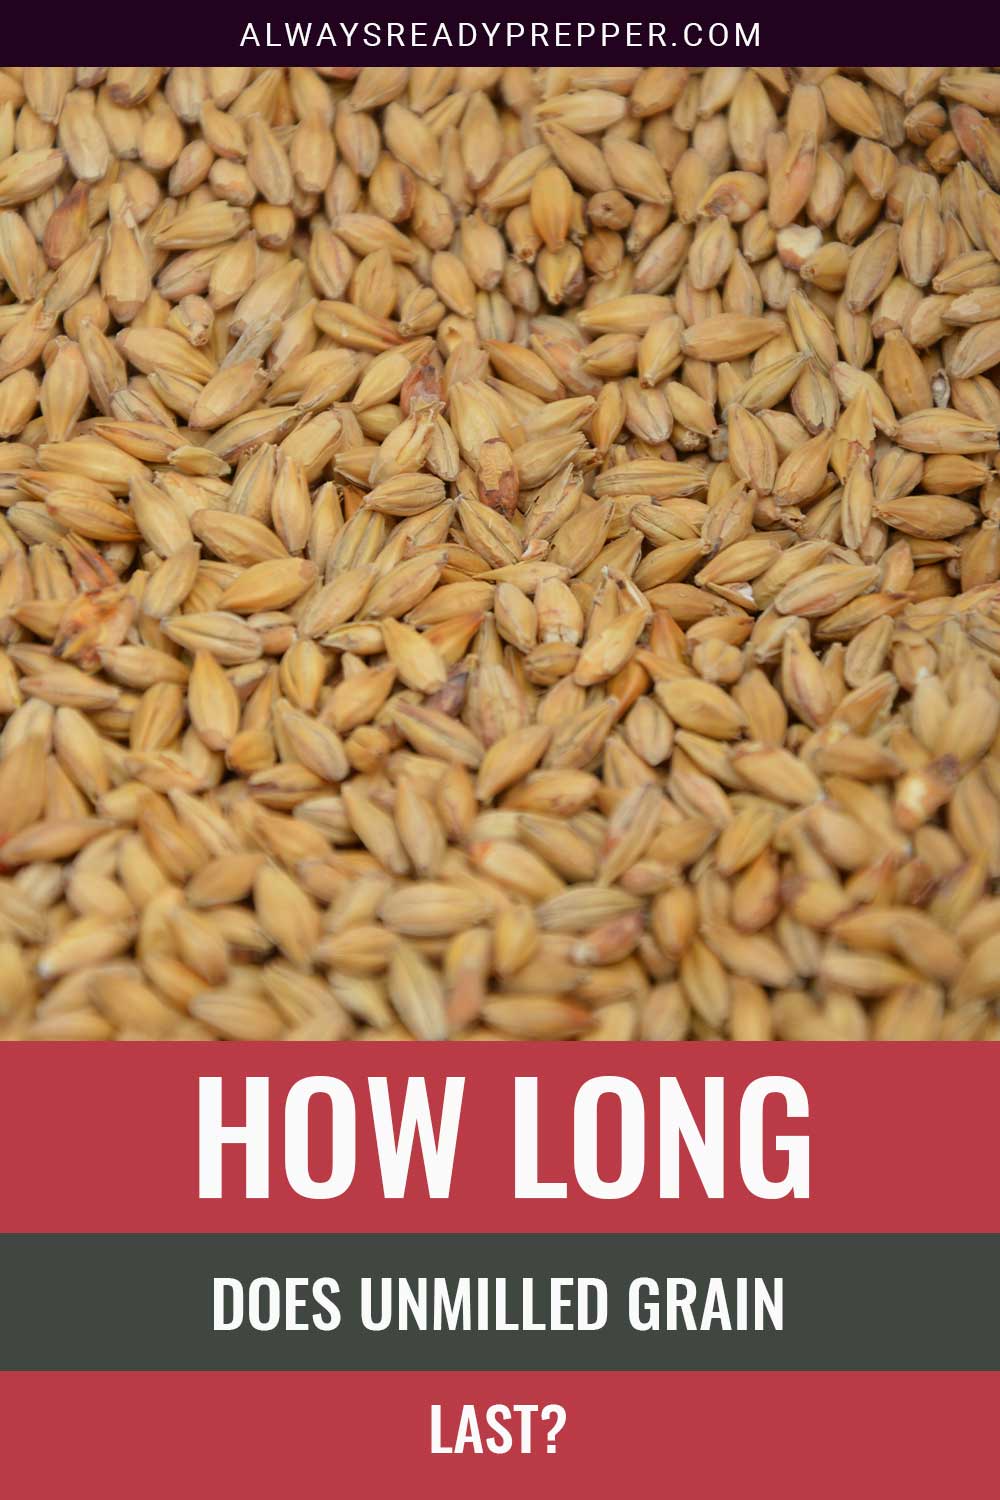 Unmilled Grains - How long do they last?